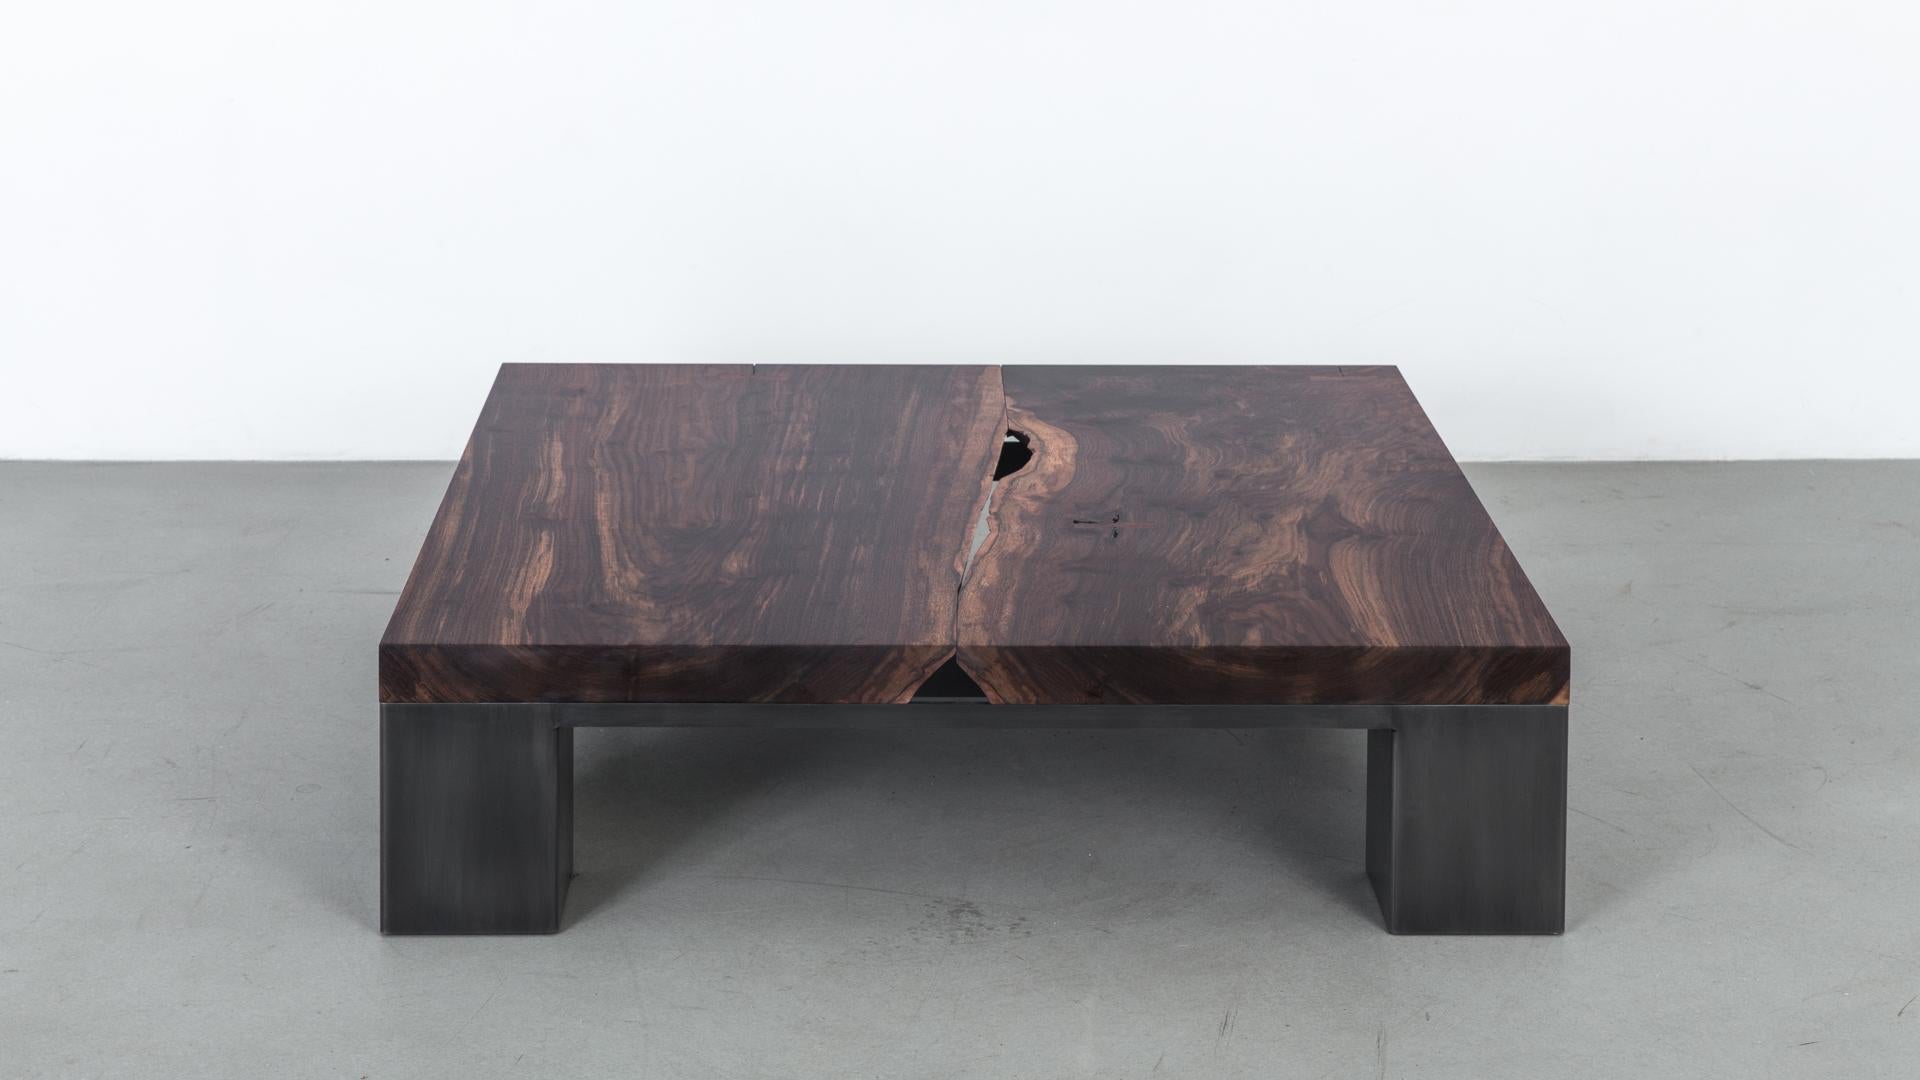 The Kong coffee table is created from a solid wood top in a walnut finish, set on a steel frame. Its visual balance of form and weight creates a dynamic contrast with the organic edge detail towards the center of the table top. The Kong Coffee